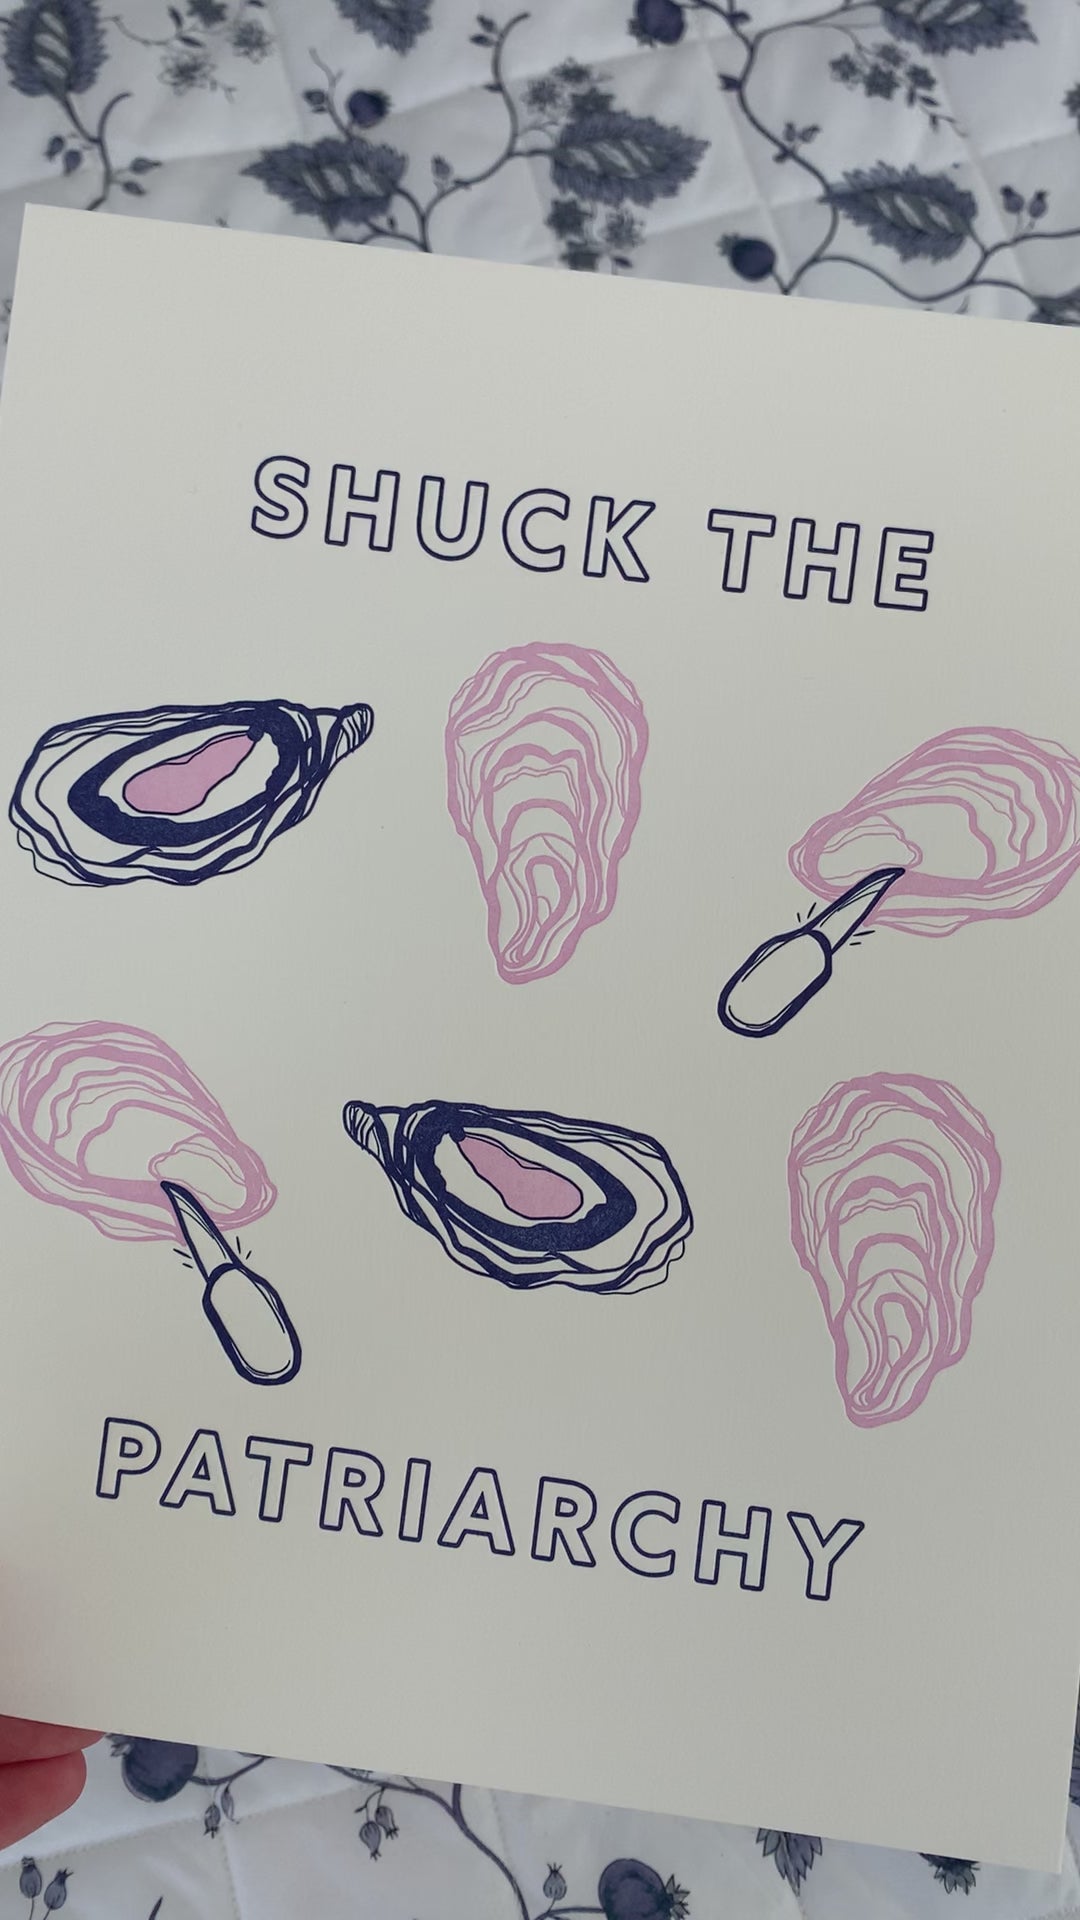 A woman holds an art print that reads "Shuck the Patriarchy" with oyster illustrations 